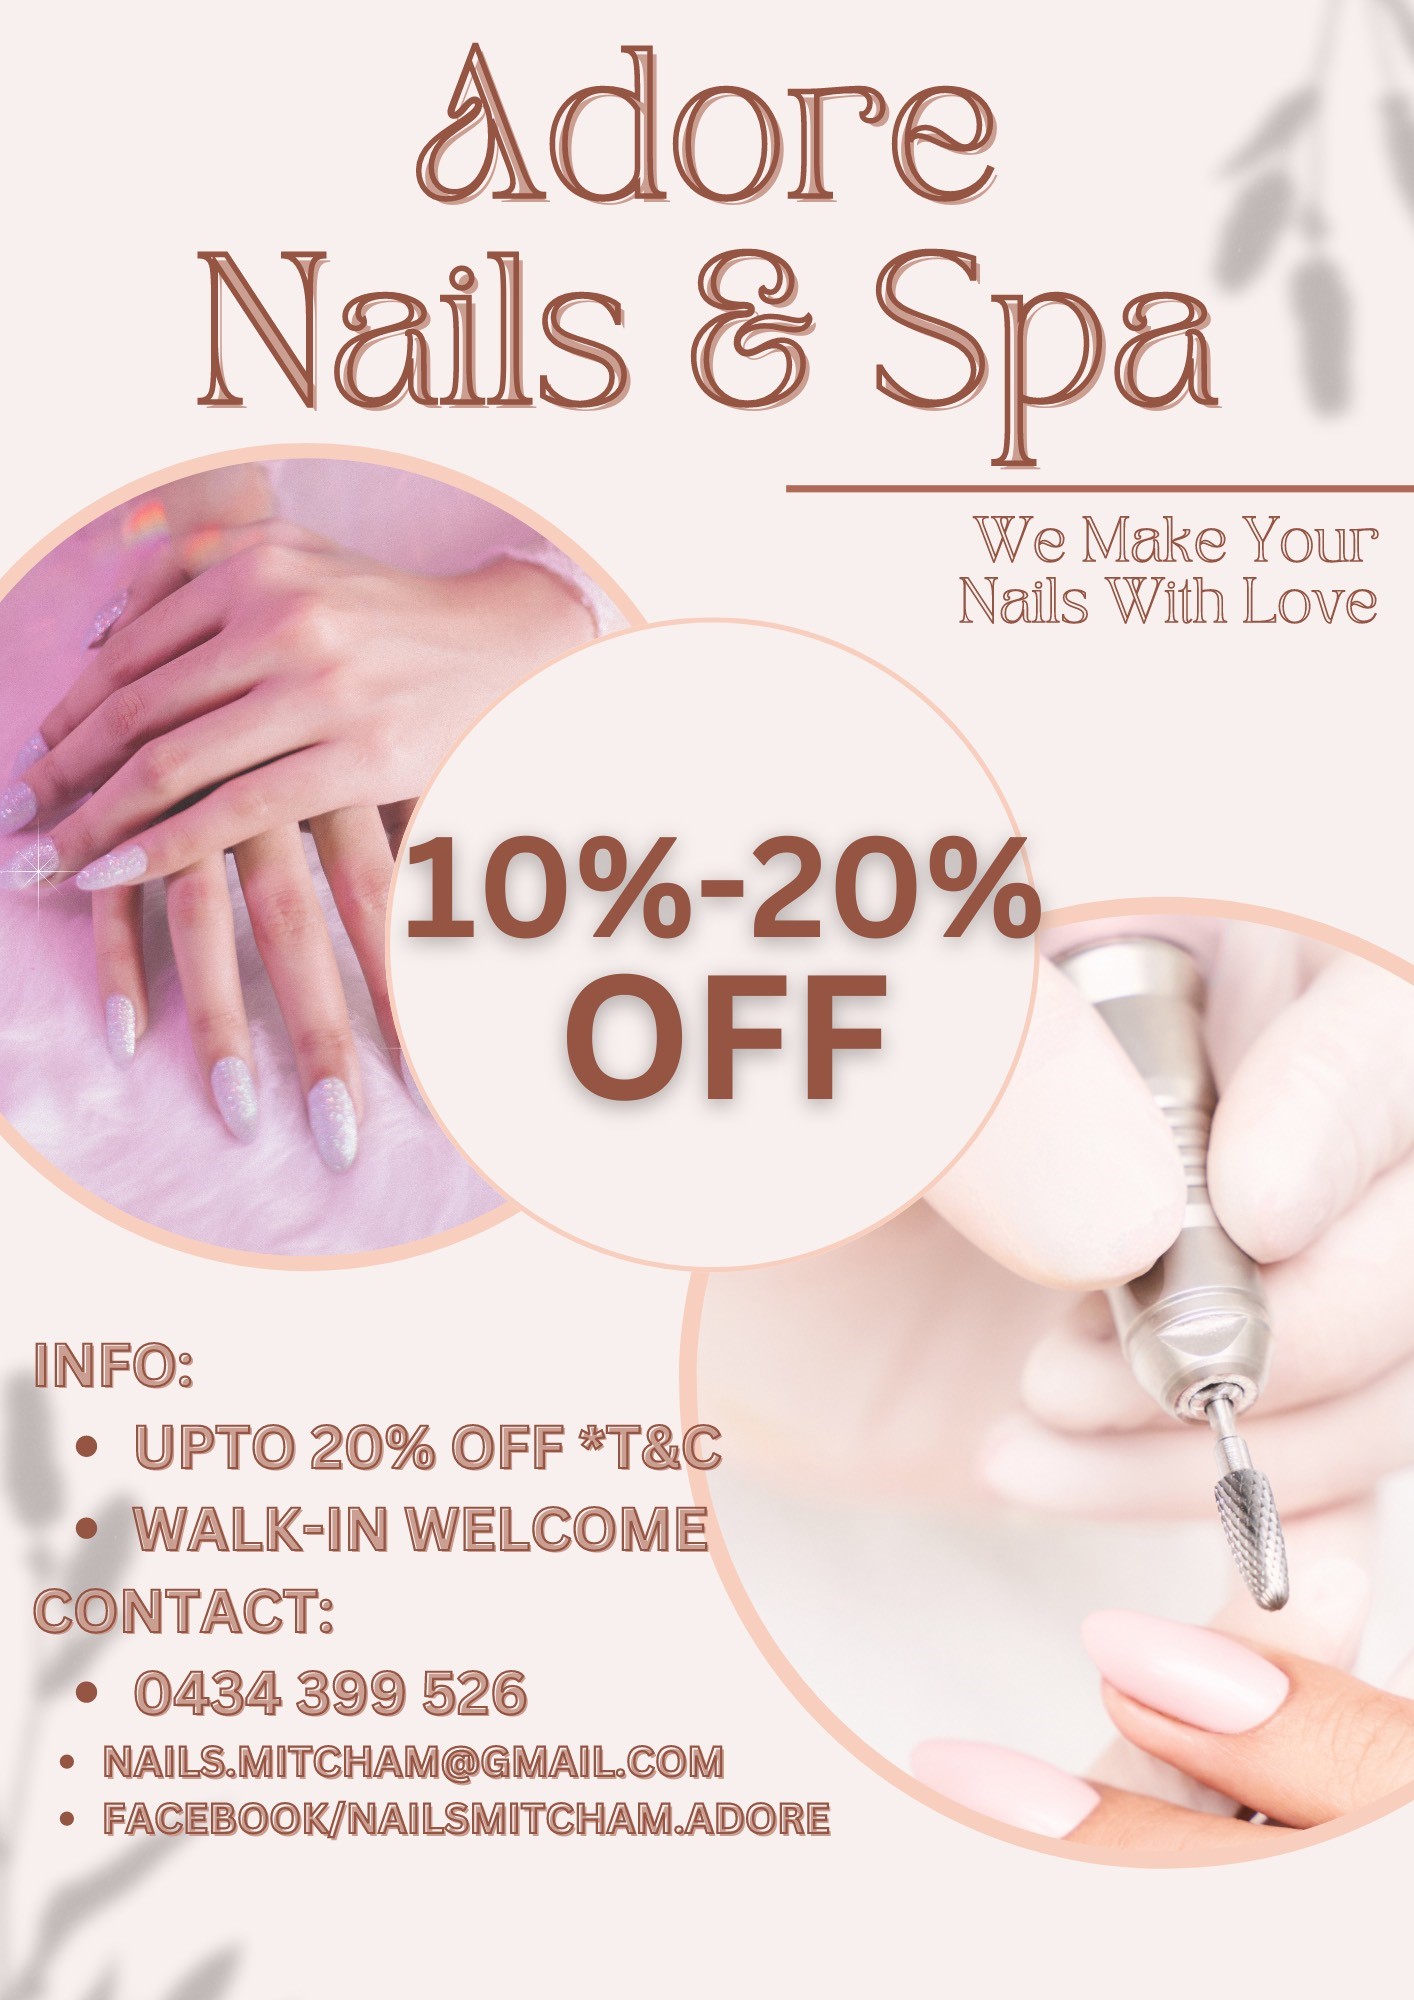 Adore Nails & Spa in Mitcham Square Shopping Centre